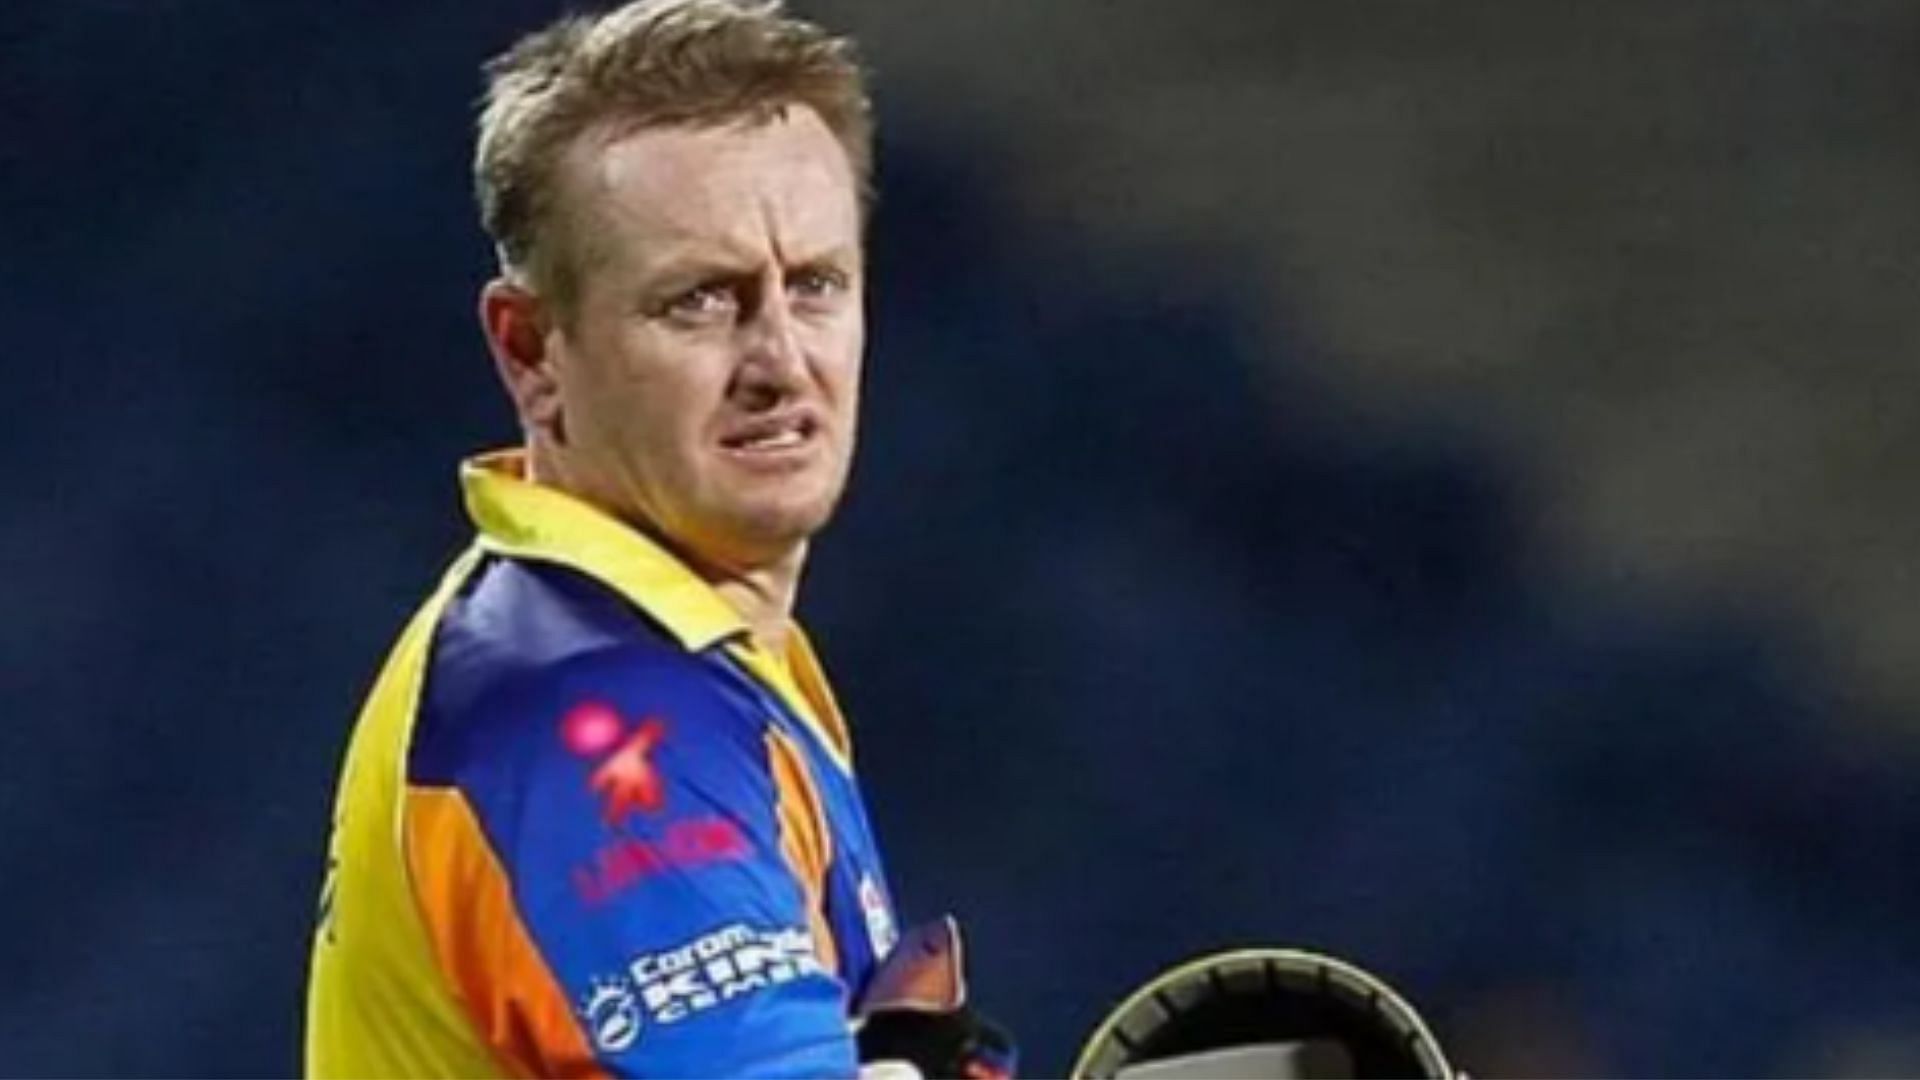 Styris played for CSK between 2011-2012.